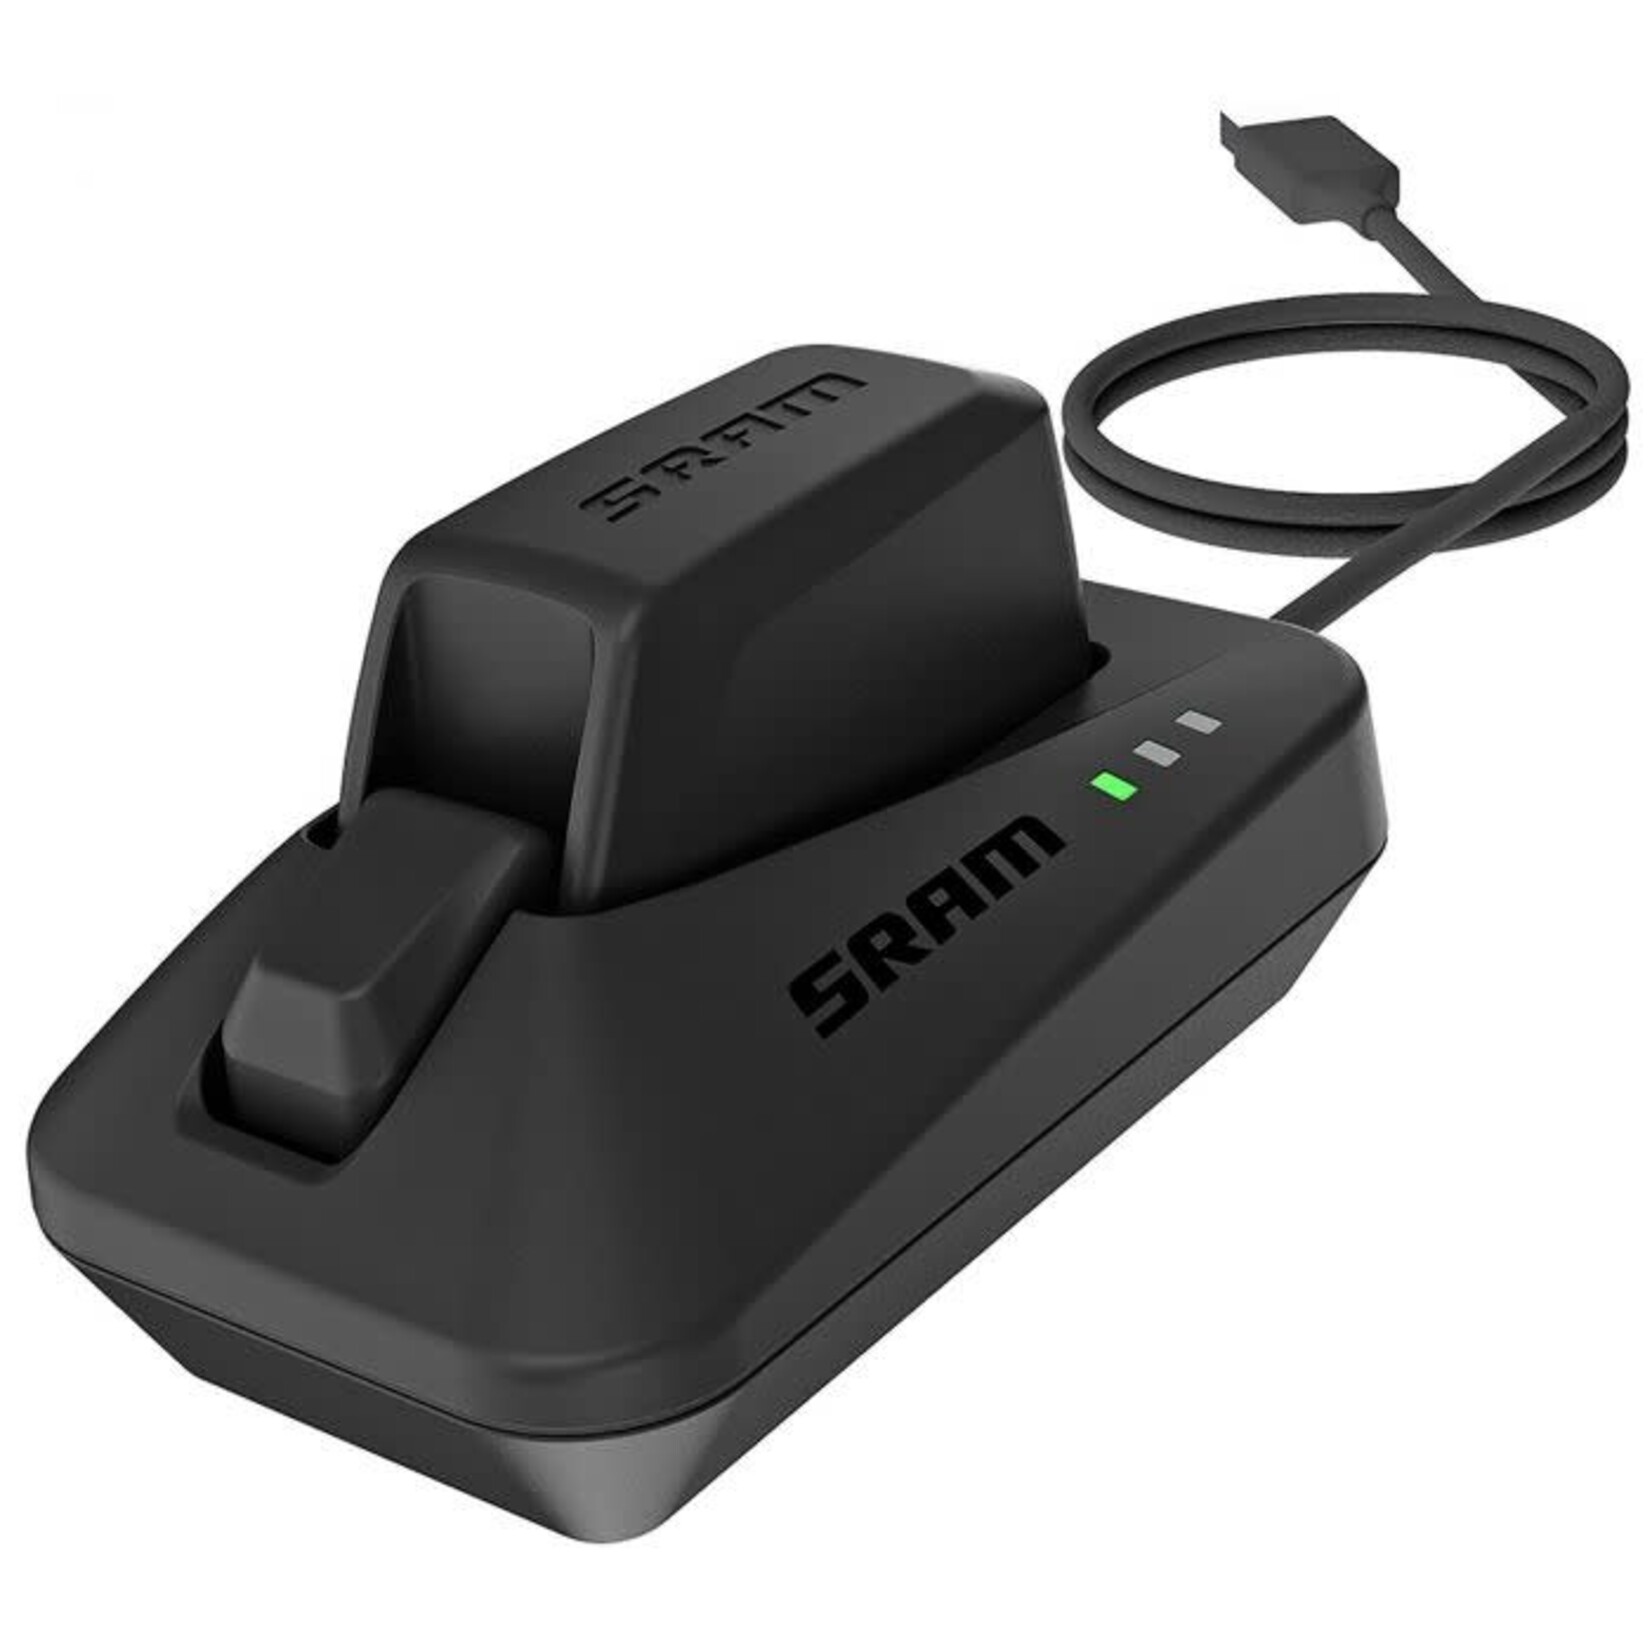 Sram SRAM ETAP BATTERY CHARGER AND CORD